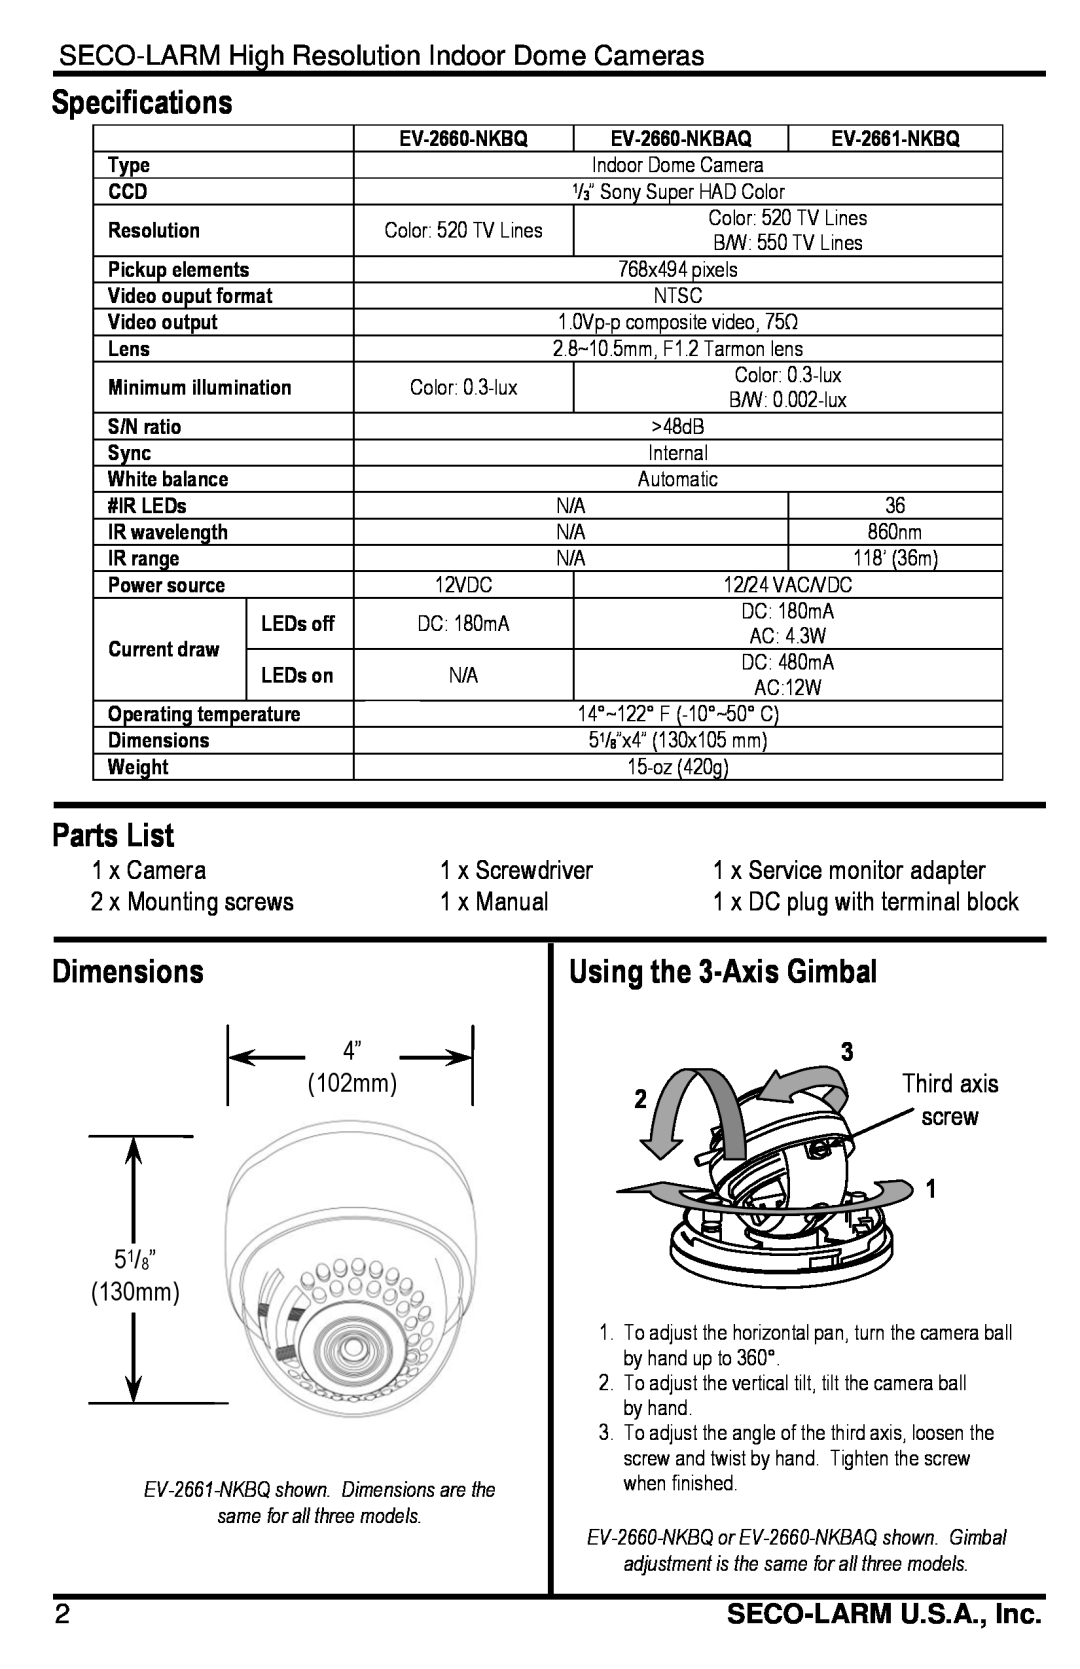 SECO-LARM USA EV-2660-NKBQ manual Specifications, Parts List, Dimensions, Using the 3-Axis Gimbal, SECO-LARM U.S.A., Inc 